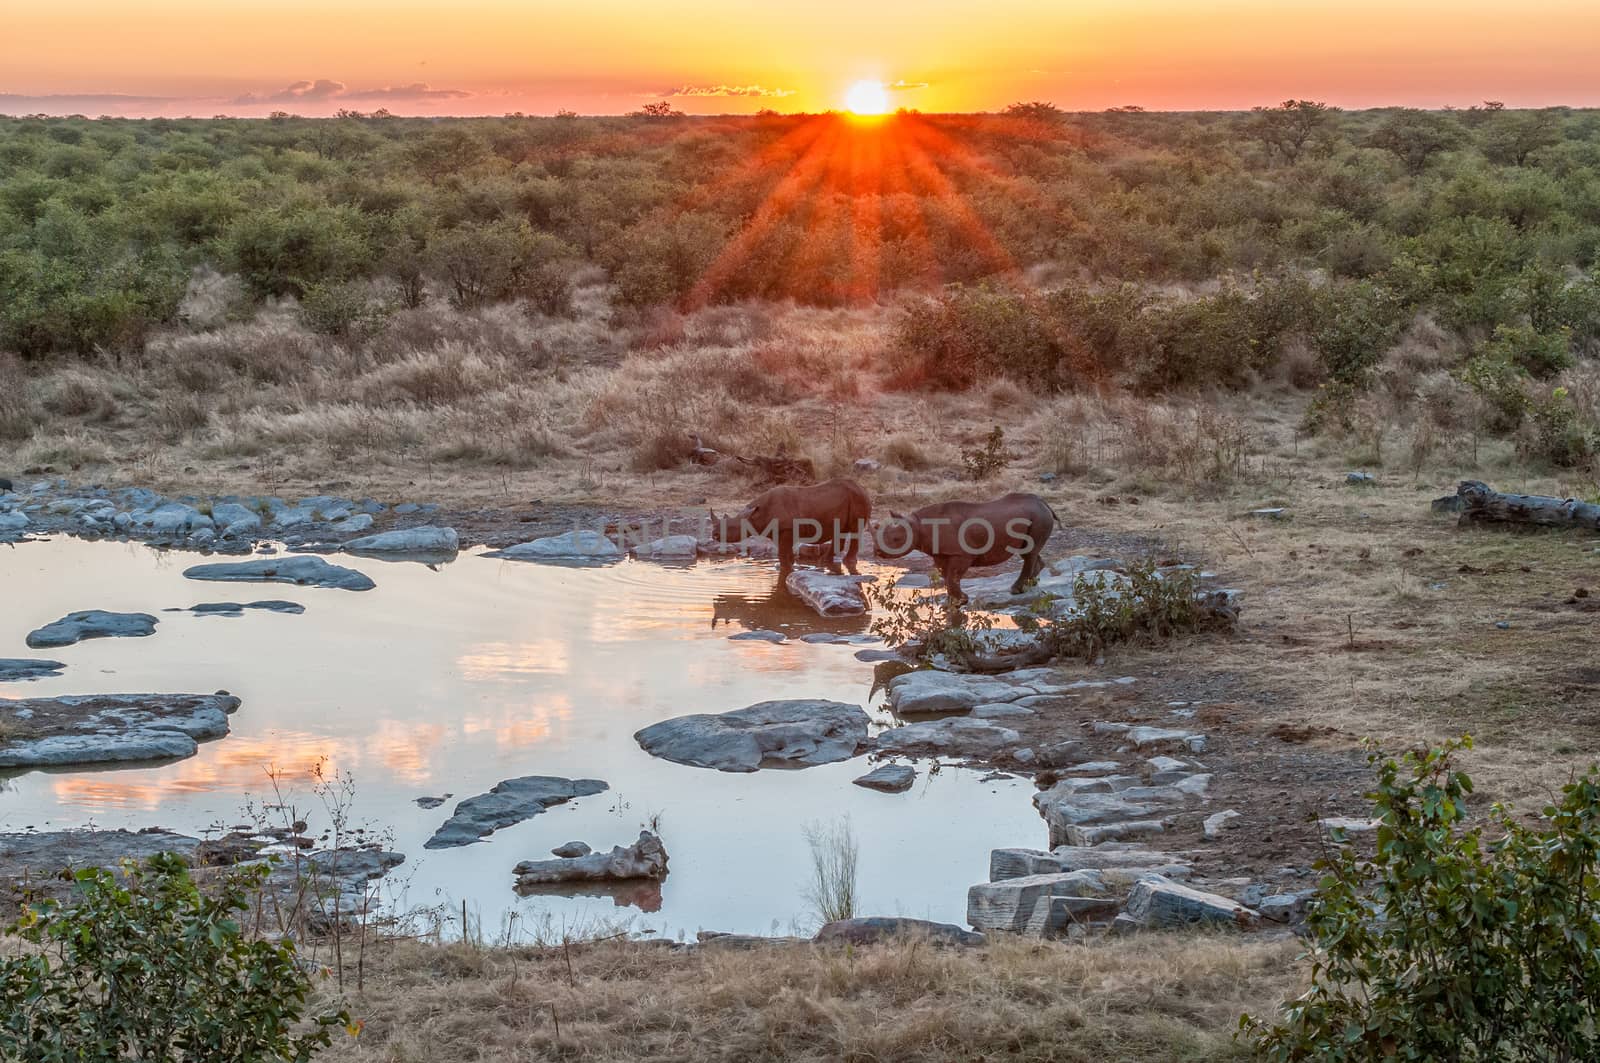 Two black rhinos, Diceros bicornis, at a waterhole with the sun setting behind them